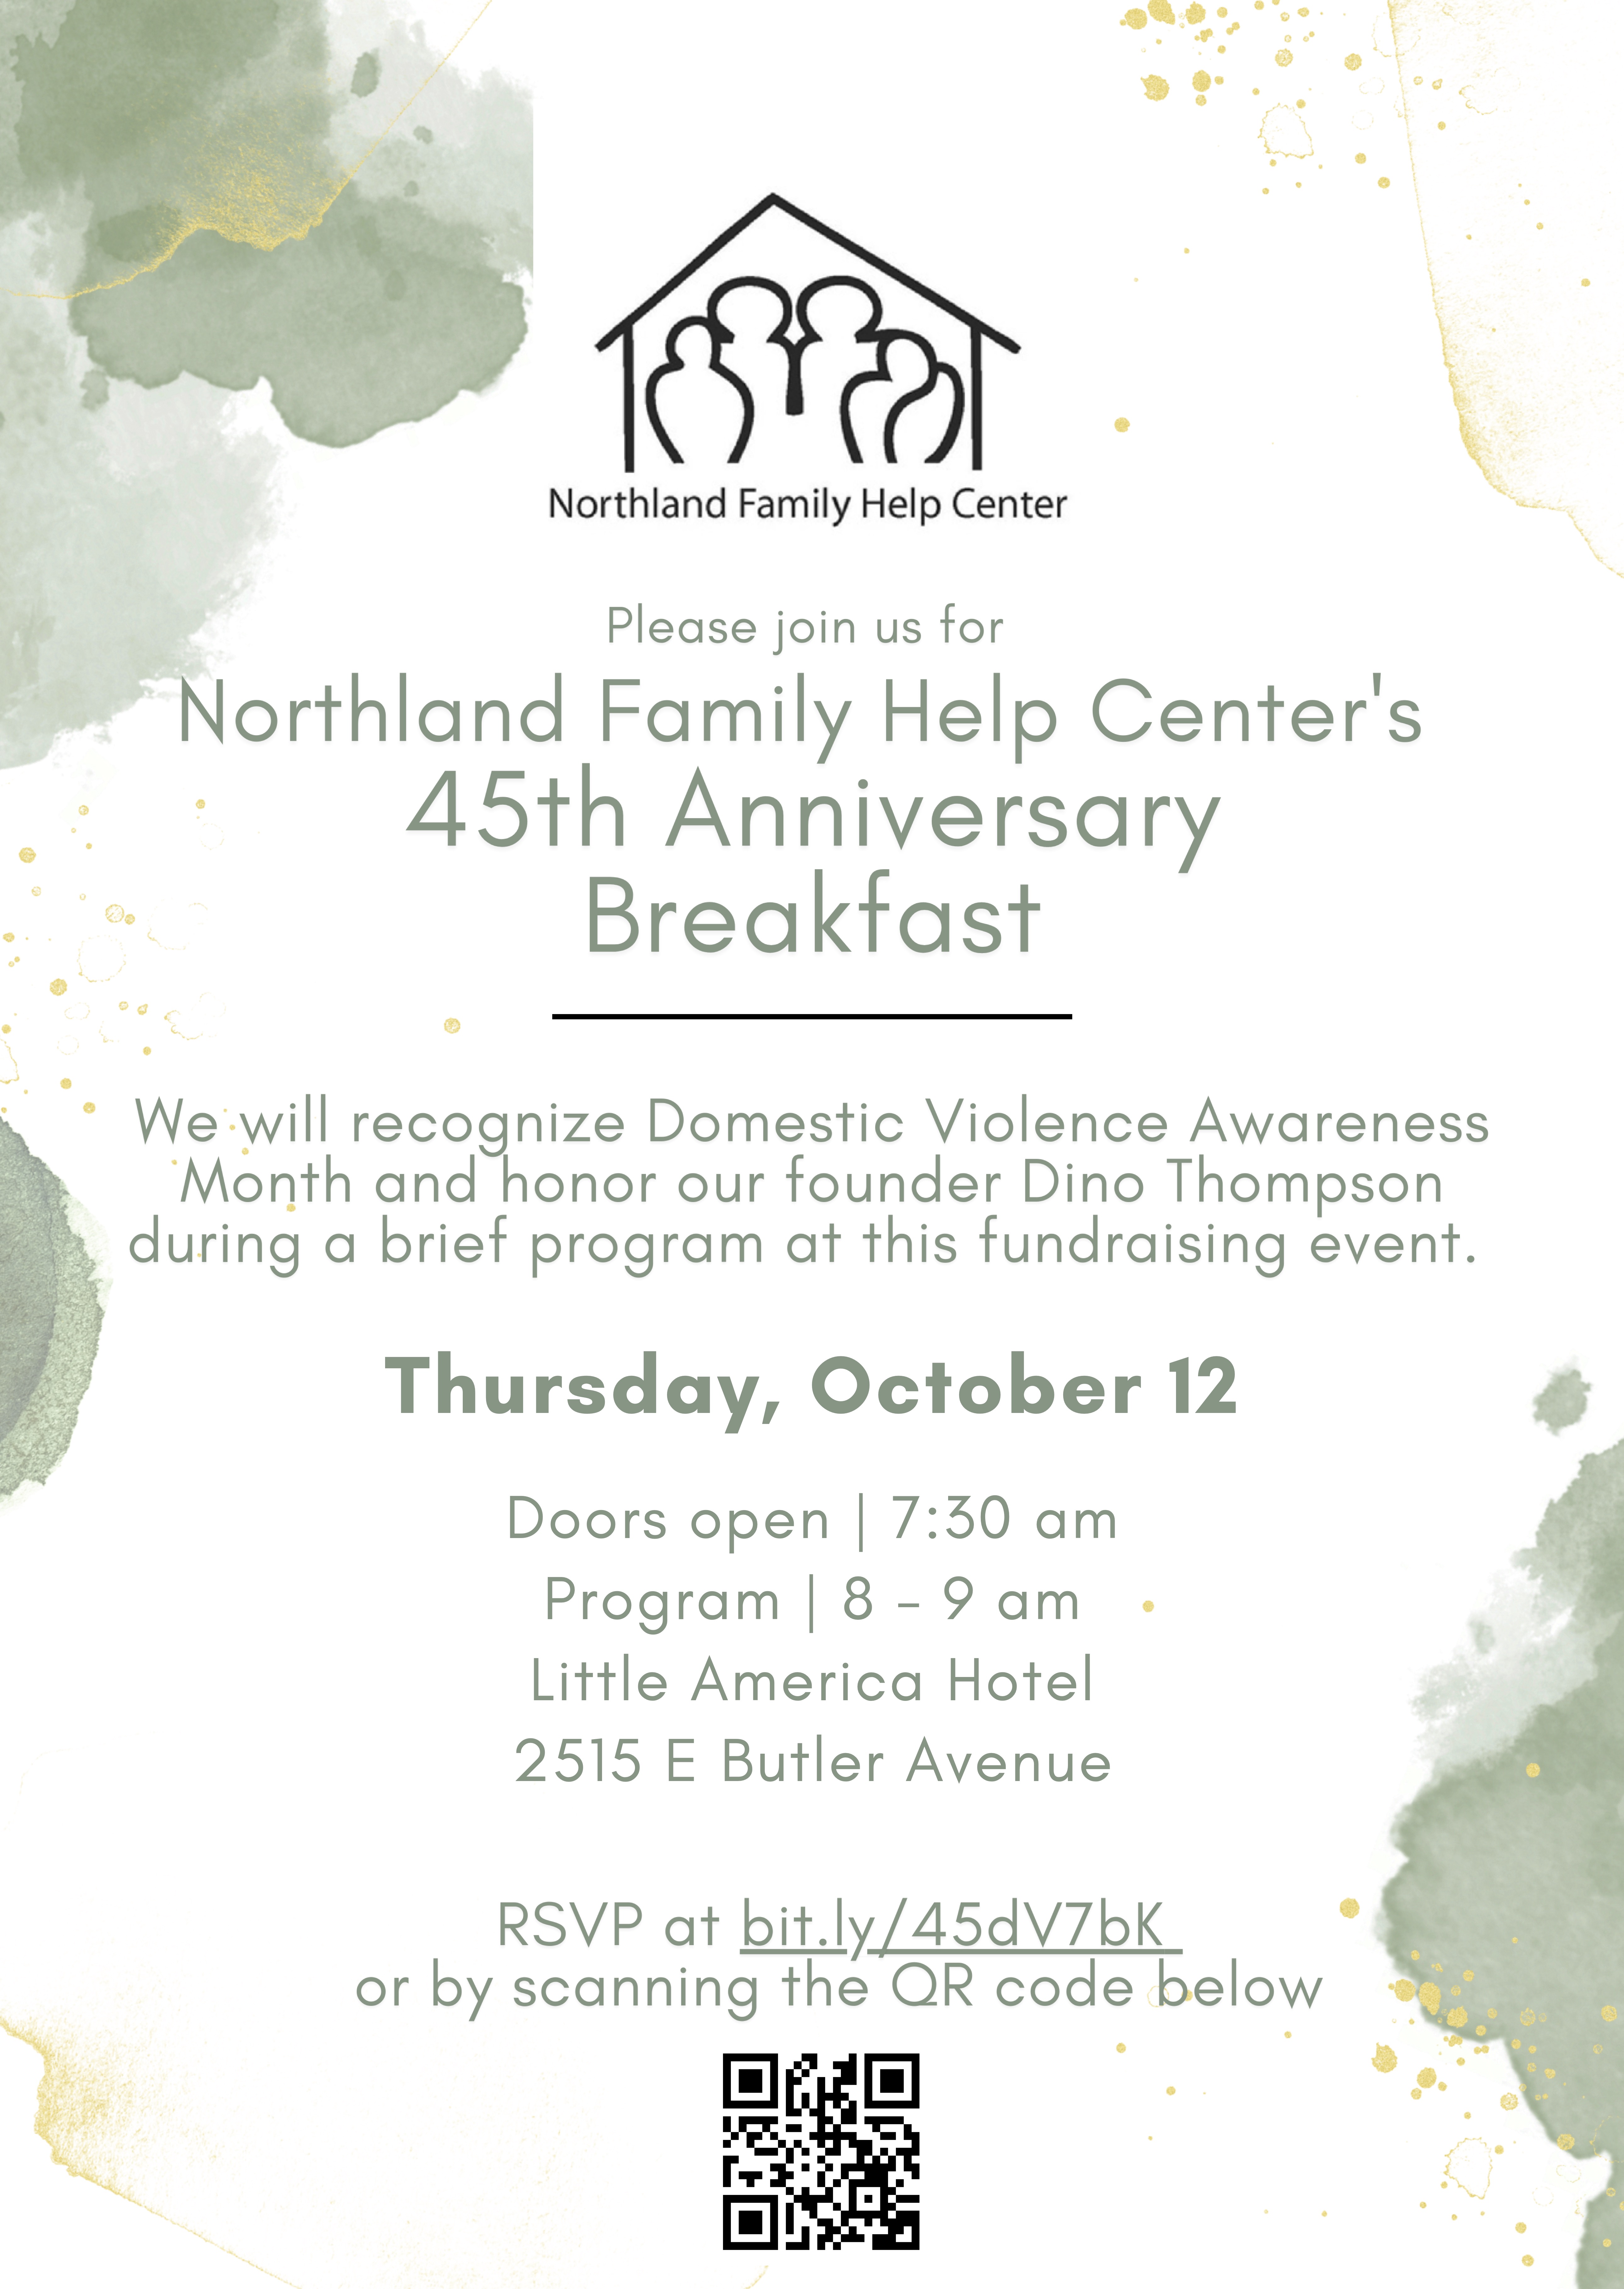 Northland Family Help Center is accepting reservations for its Oct. 12 fundraising breakfast